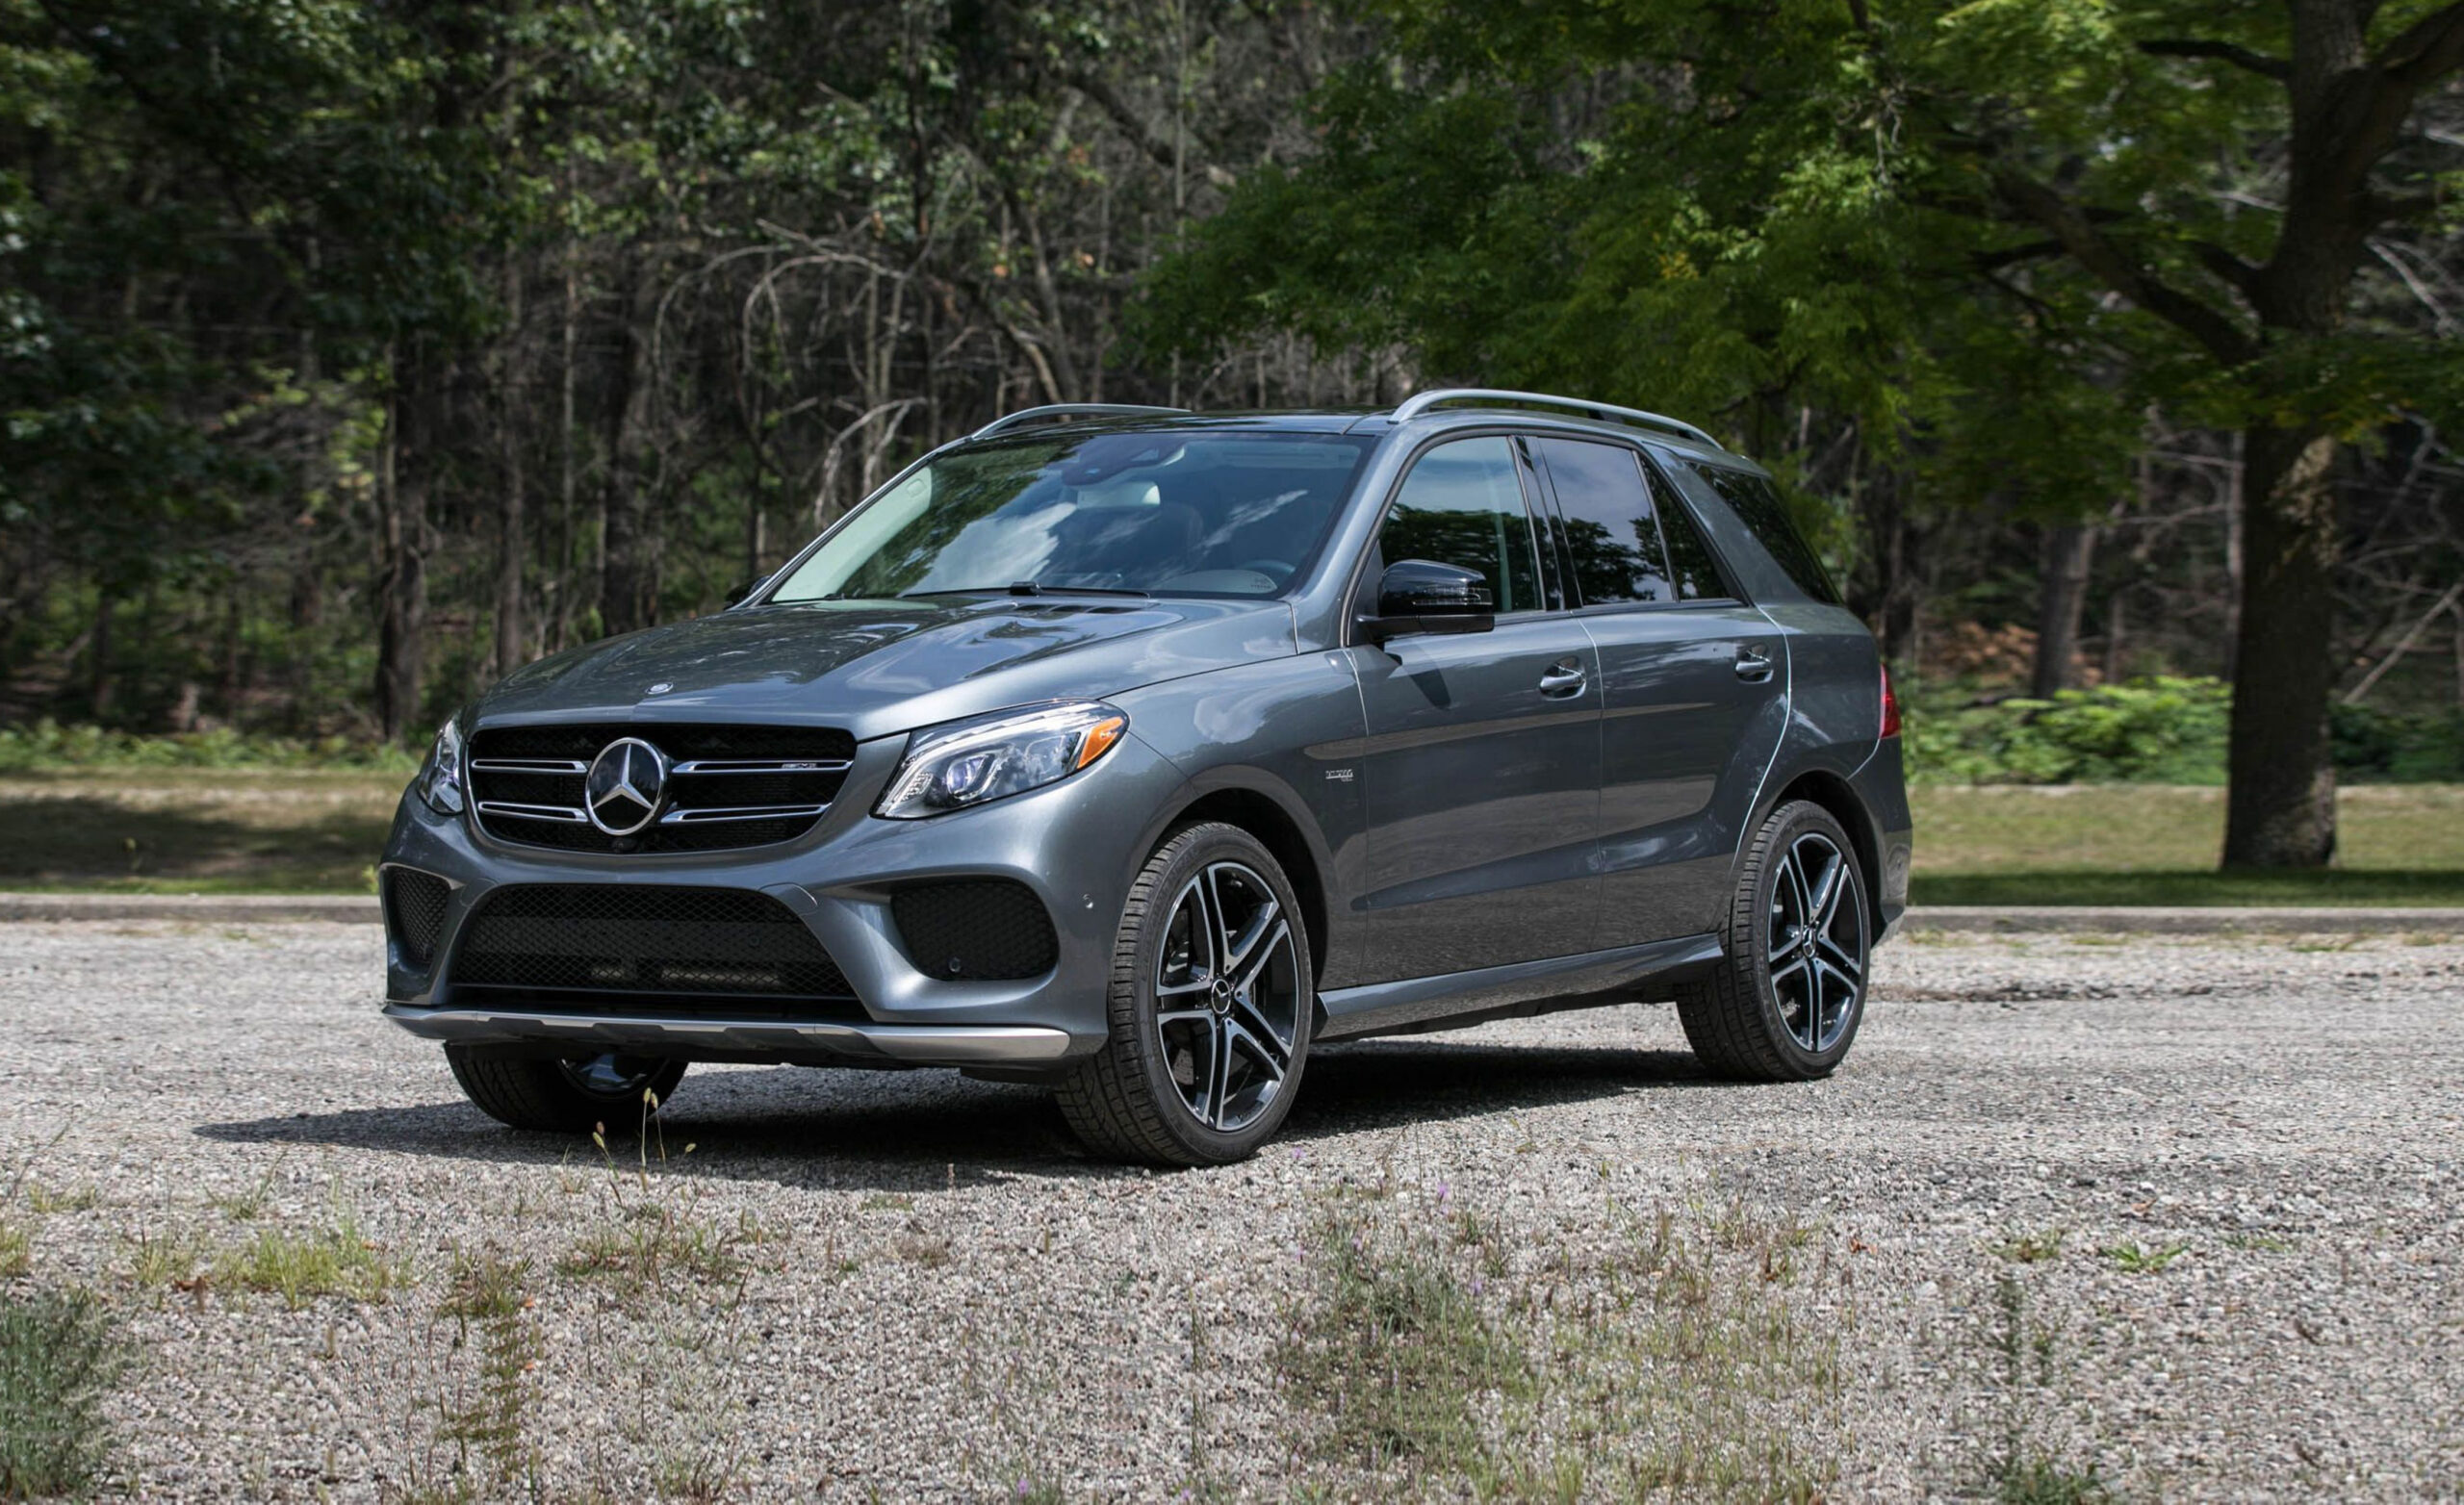 Release Date gle 43 amg hp